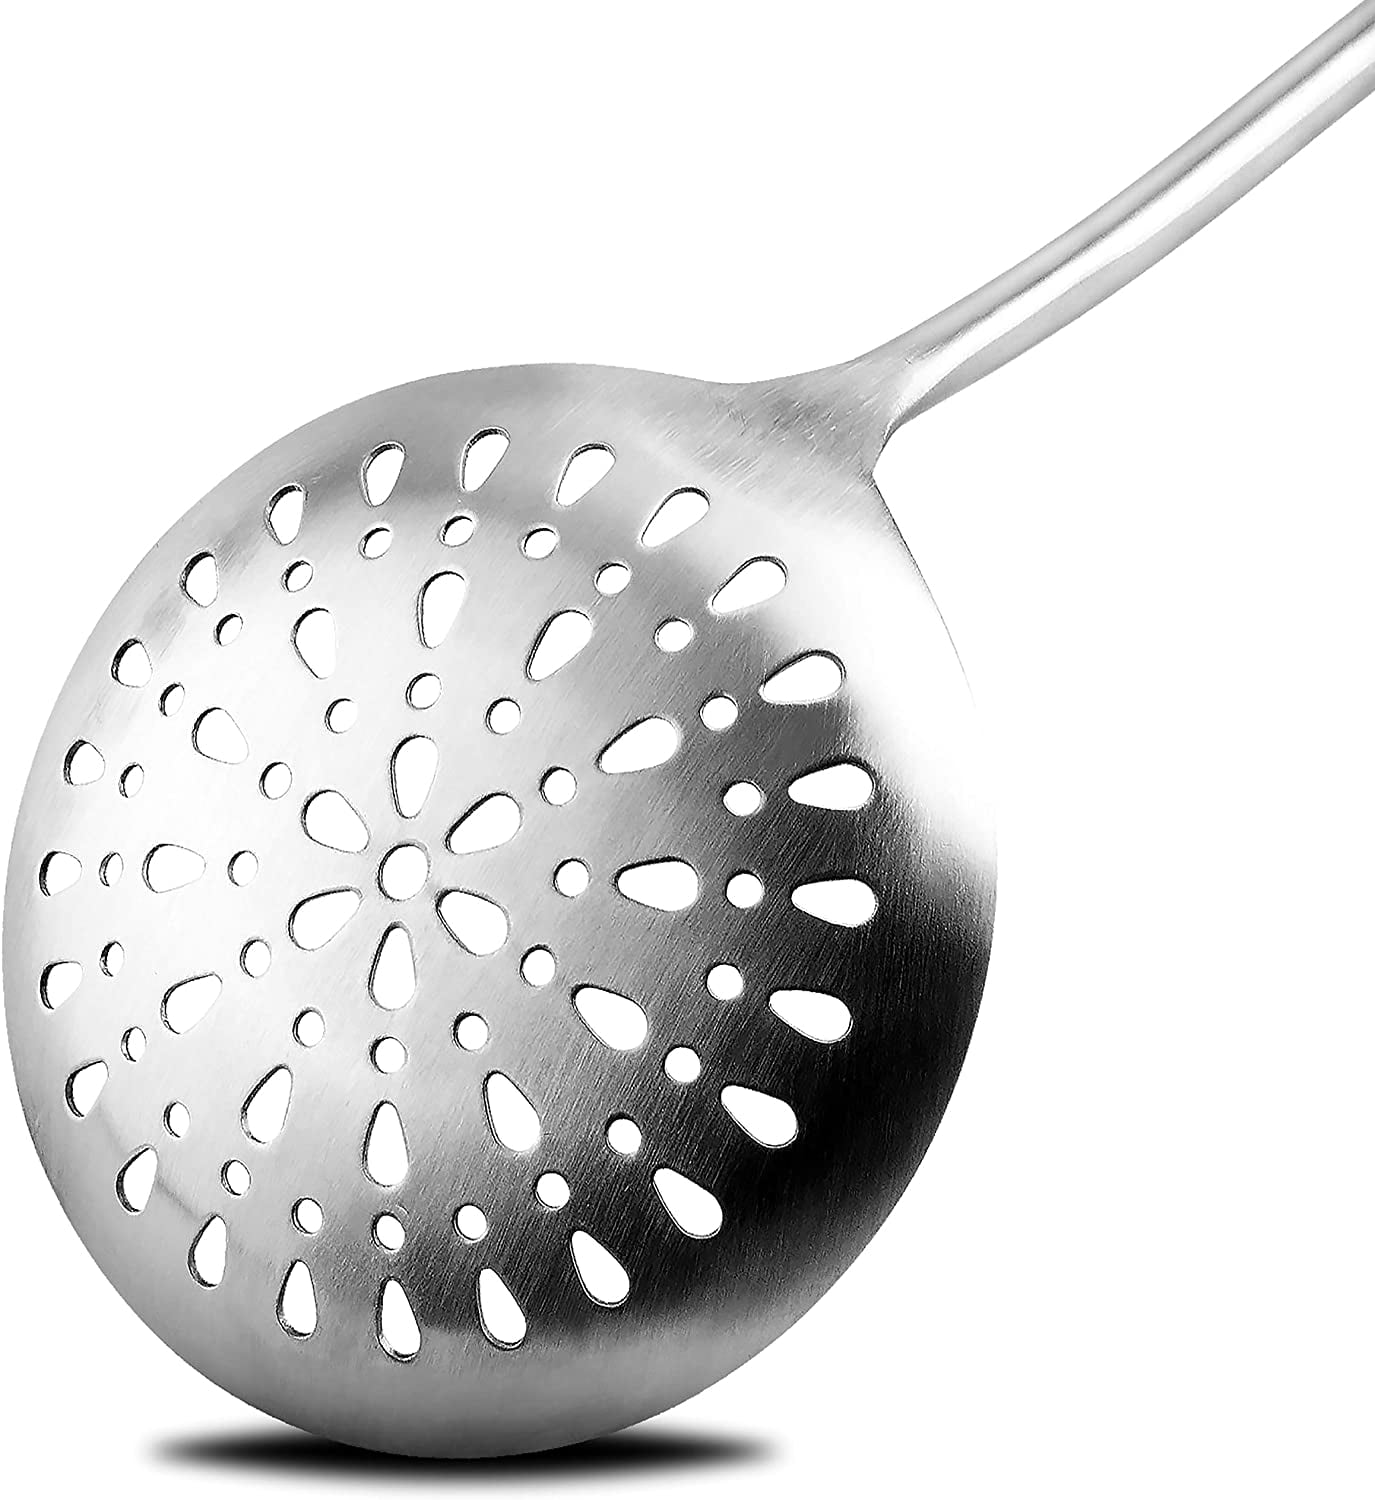 Skimmer Slotted Spoon kitchamajigs Strainer Ladle Heavy Duty 304 Stainless  Steel Metal Spatula - Skimmer Slotted Spoon, Cooking Spoon for KitchenSpoon